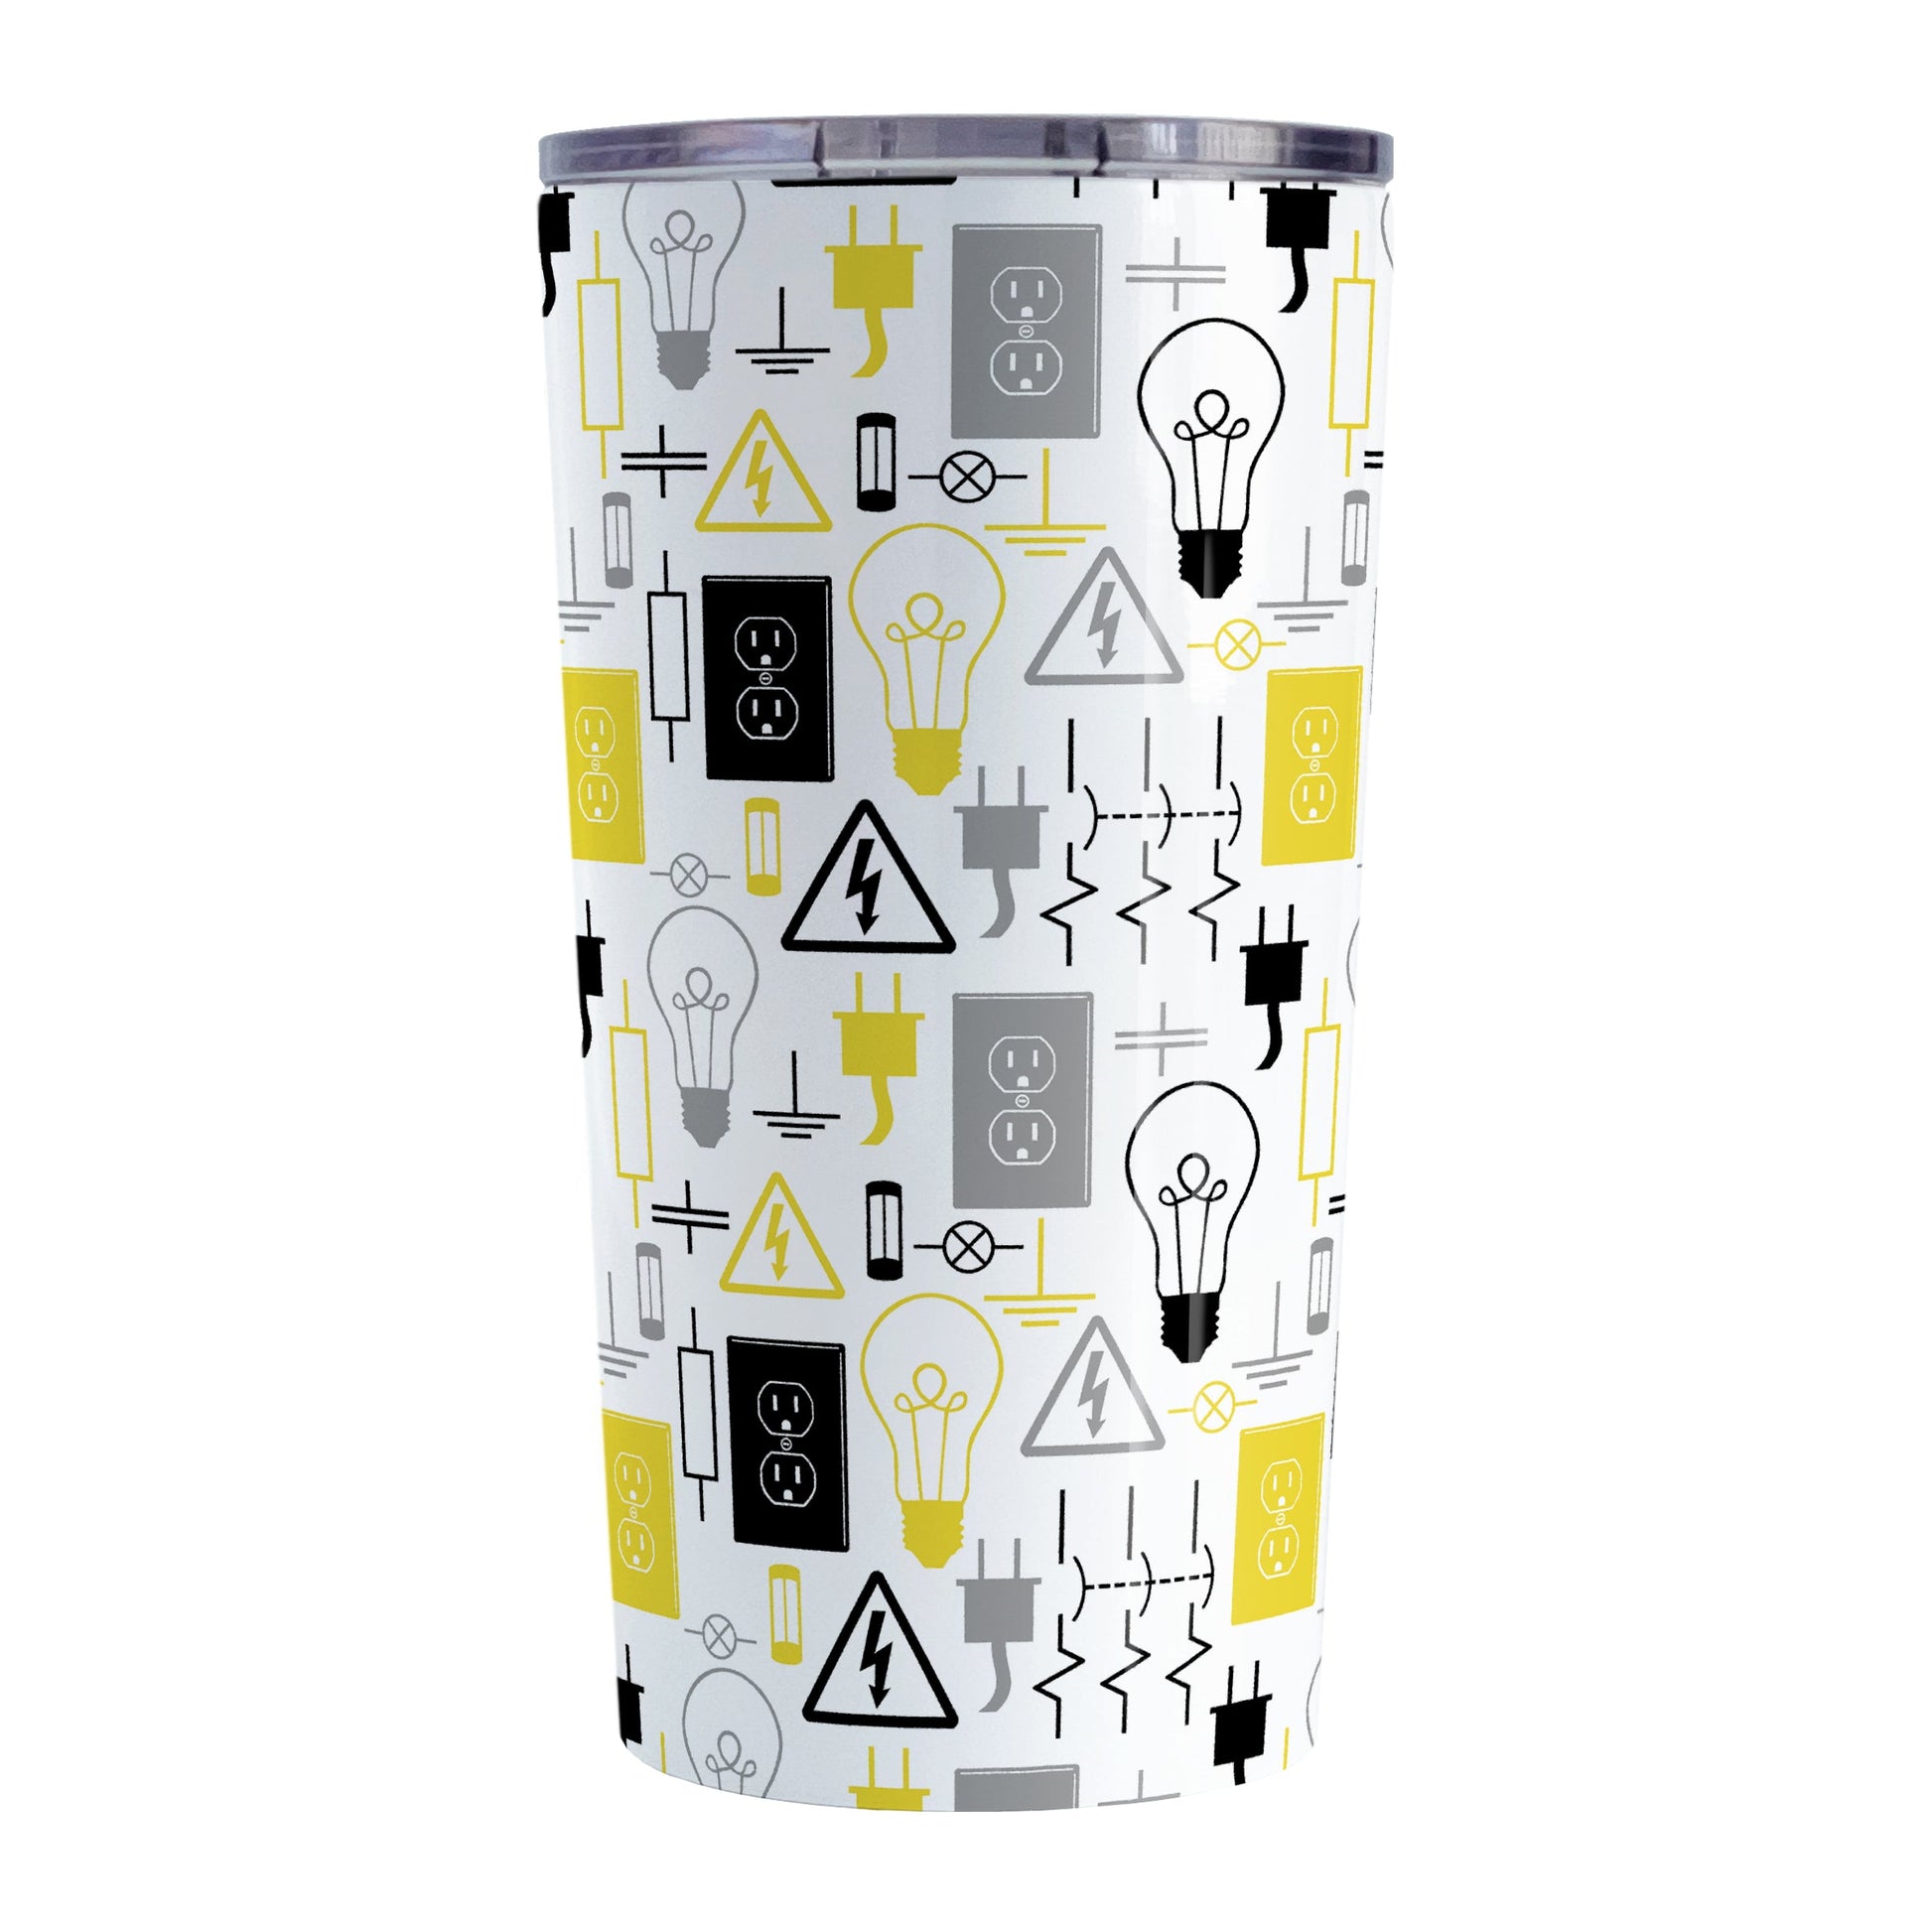 Yellow Electrical Electrician Tumbler Cup (20oz) at Amy's Coffee Mugs. A stainless steel insulated tumbler cup designed with an electrical pattern with light bulbs, wall sockets, plugs, fuses, and other electricity symbols in yellow, gray, and black colors that wraps around the cup. This cup is perfect for people who work a trade as an electrician, love working with electronics, and working in electrical engineering. 